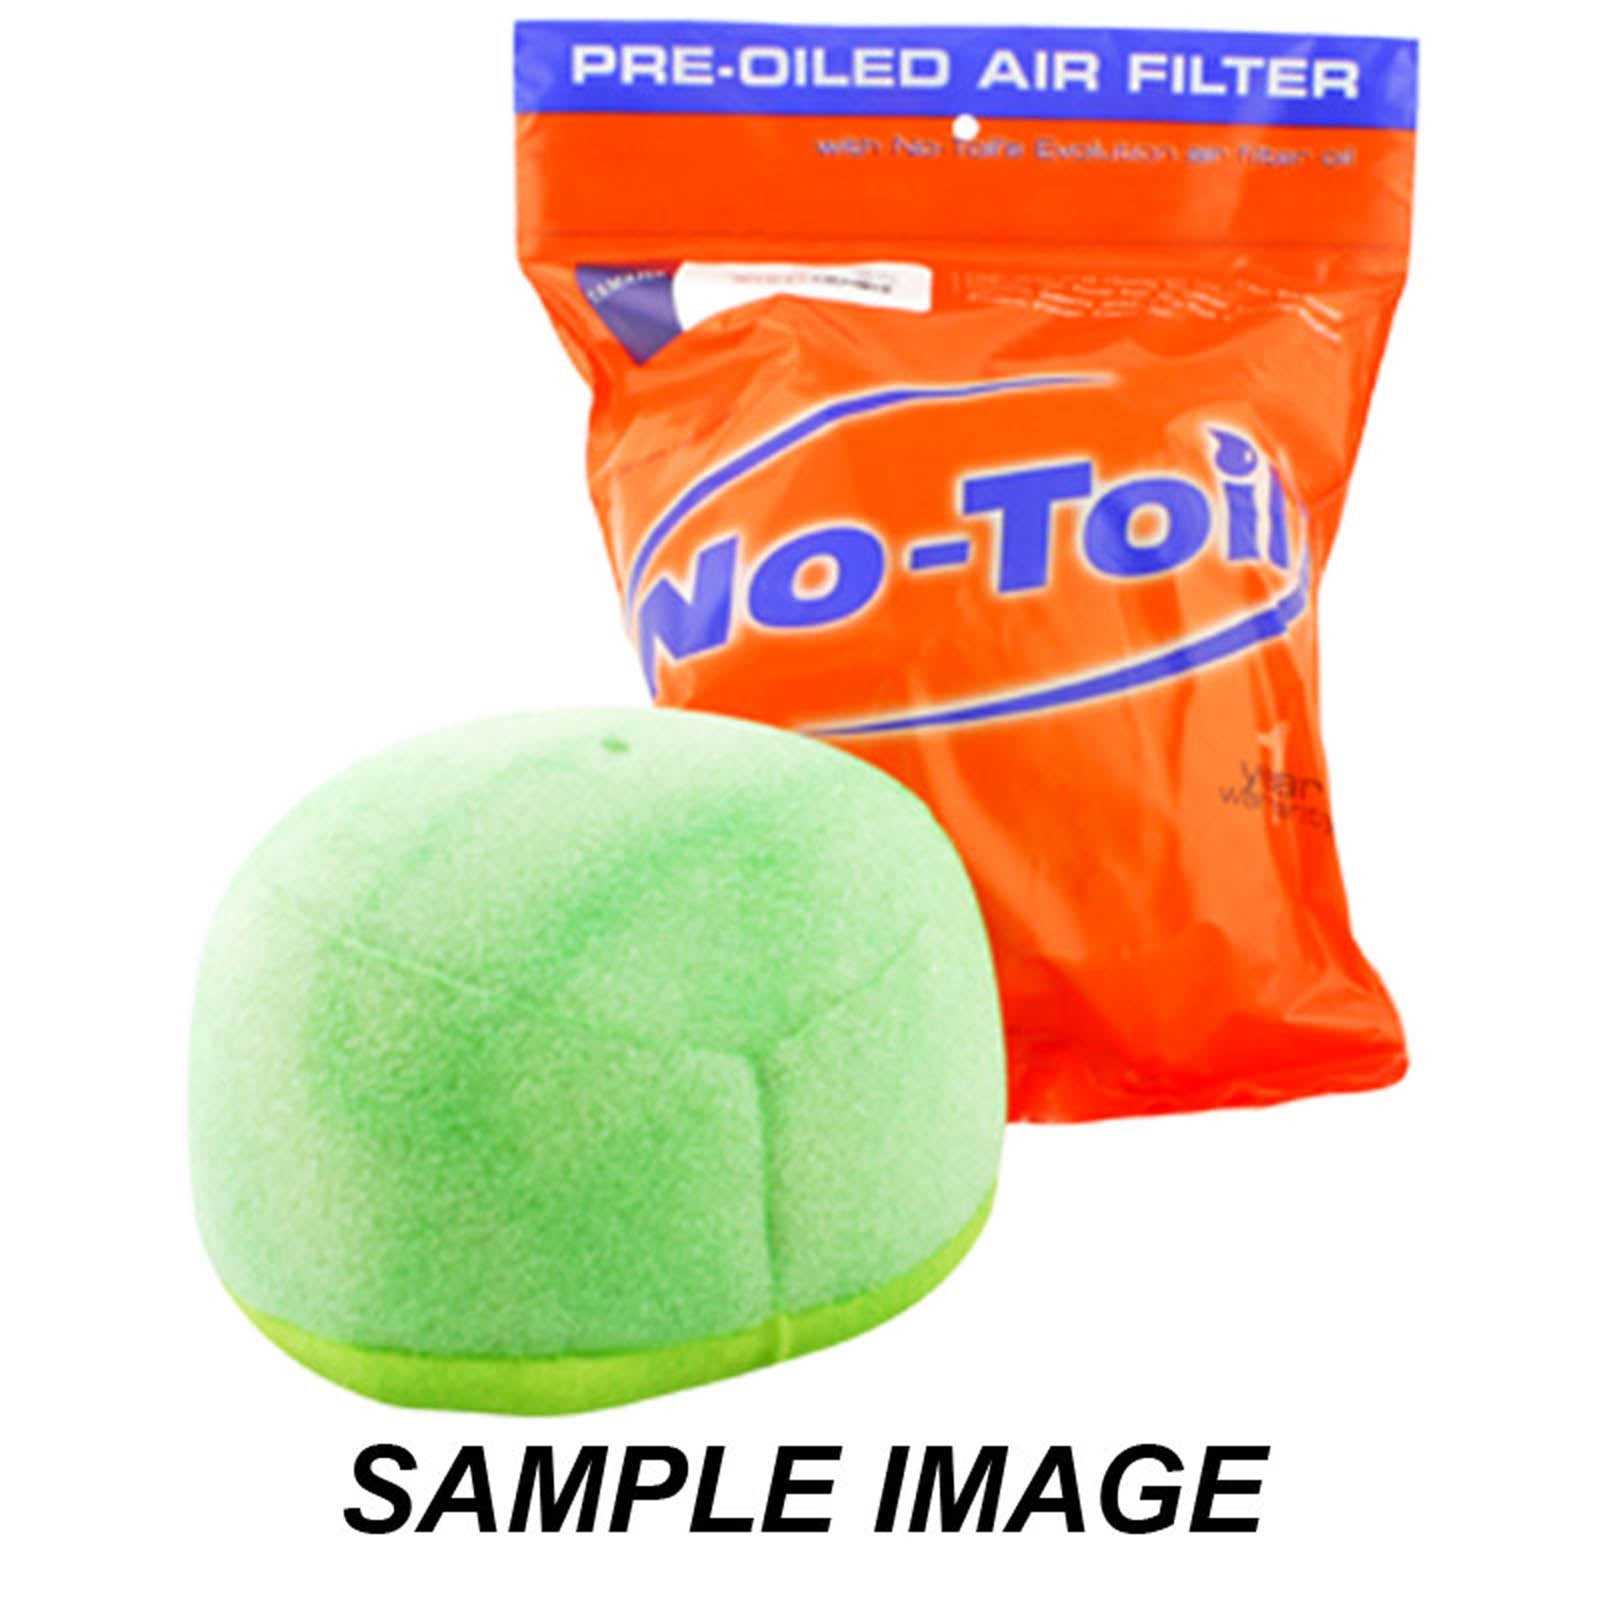 No-Toil, PRE-OILED FILTER HON CRF250R 10-